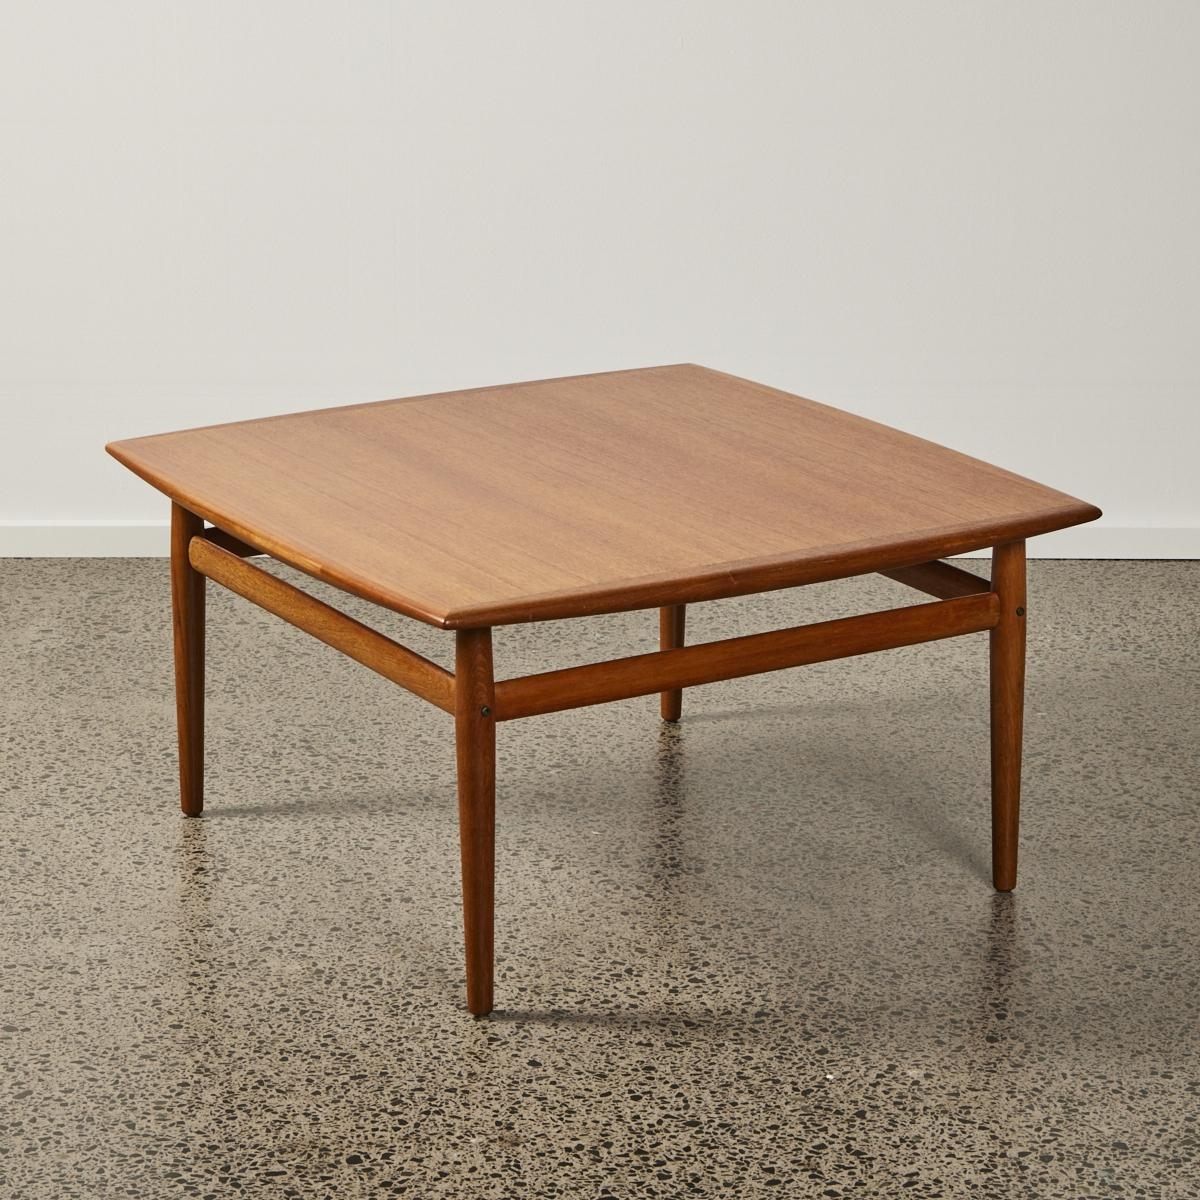 A Square Coffee Table by Grete Jalk for Glostrup by Grete Jalk, 1960s